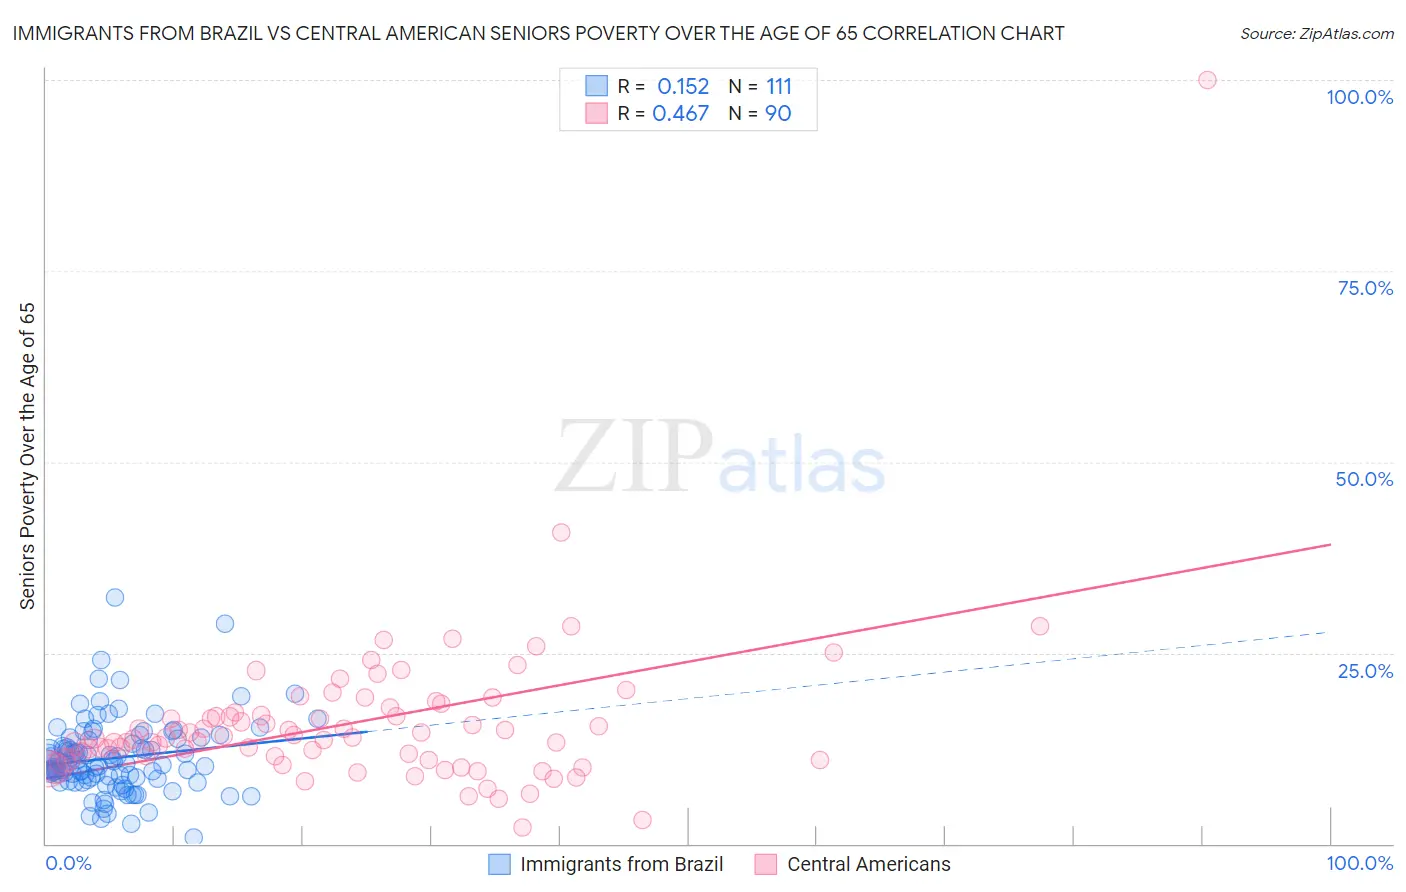 Immigrants from Brazil vs Central American Seniors Poverty Over the Age of 65